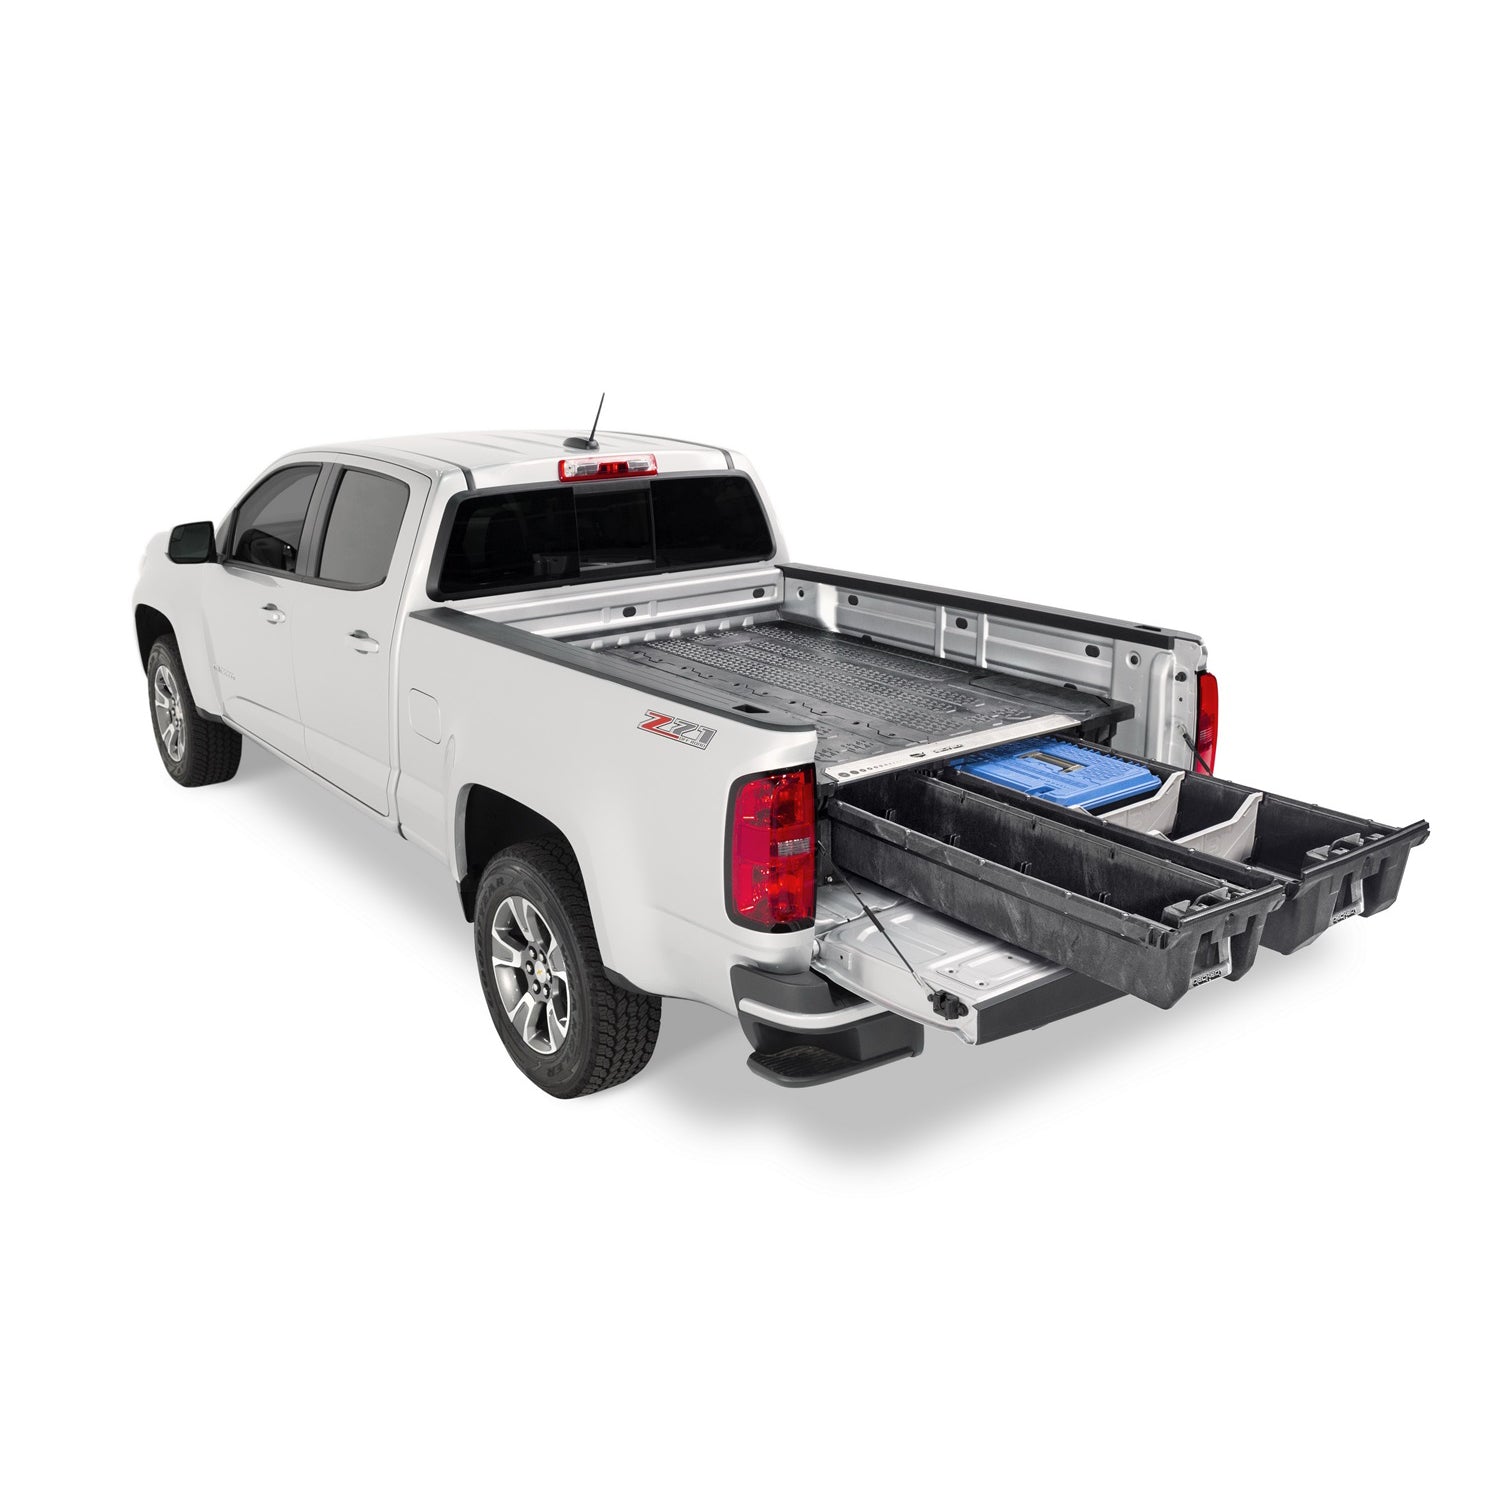 Decked Toyota Tacoma Truck Bed Storage System Decked   - USASafeAndVault